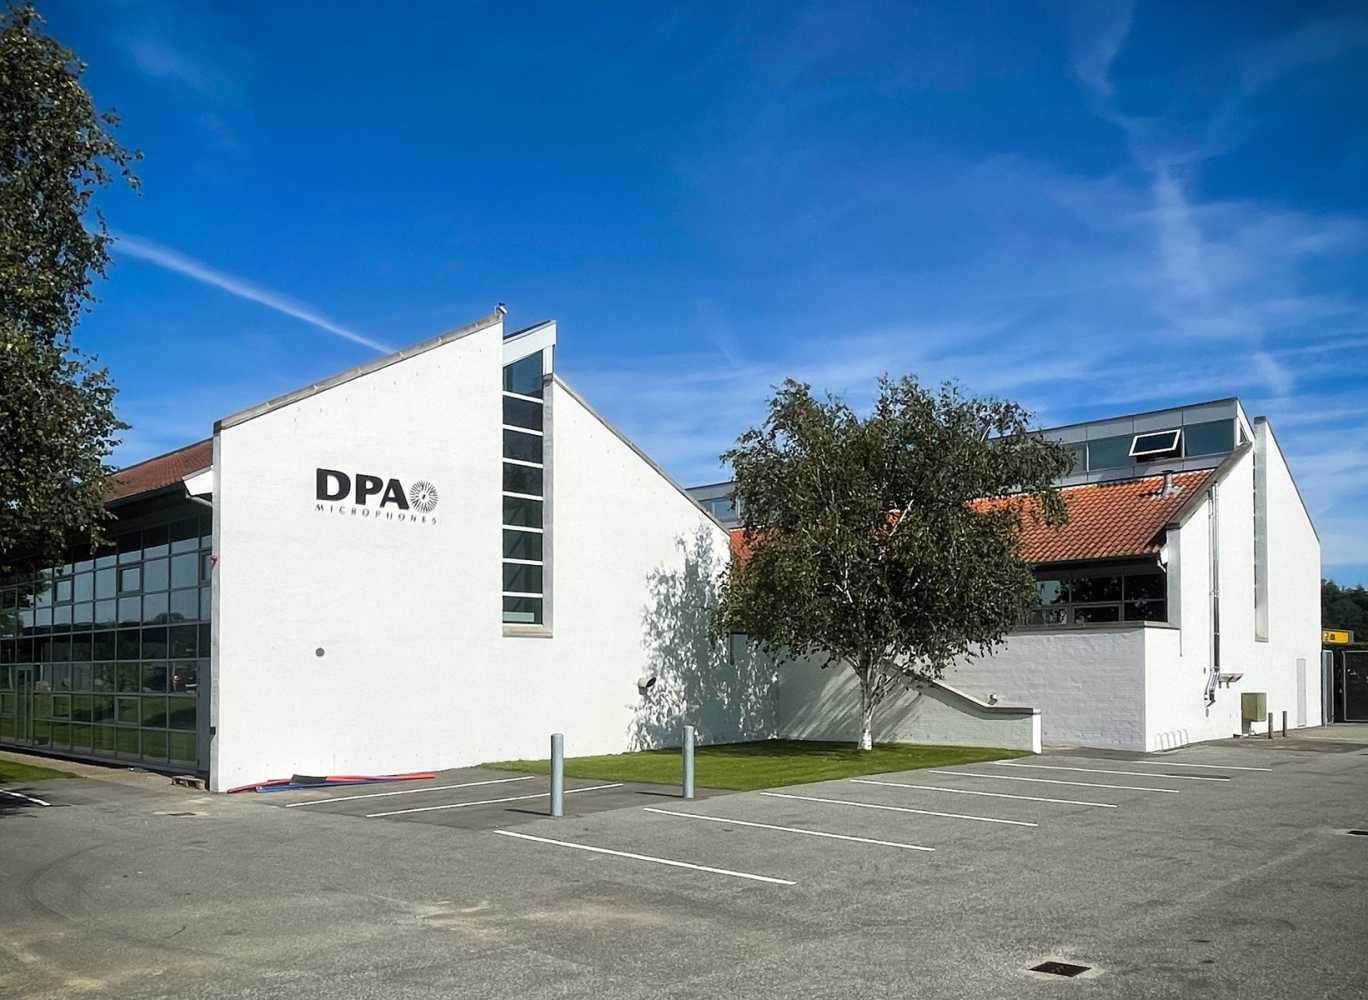 DPA’s new headquarters will put an emphasis on research and development facilities